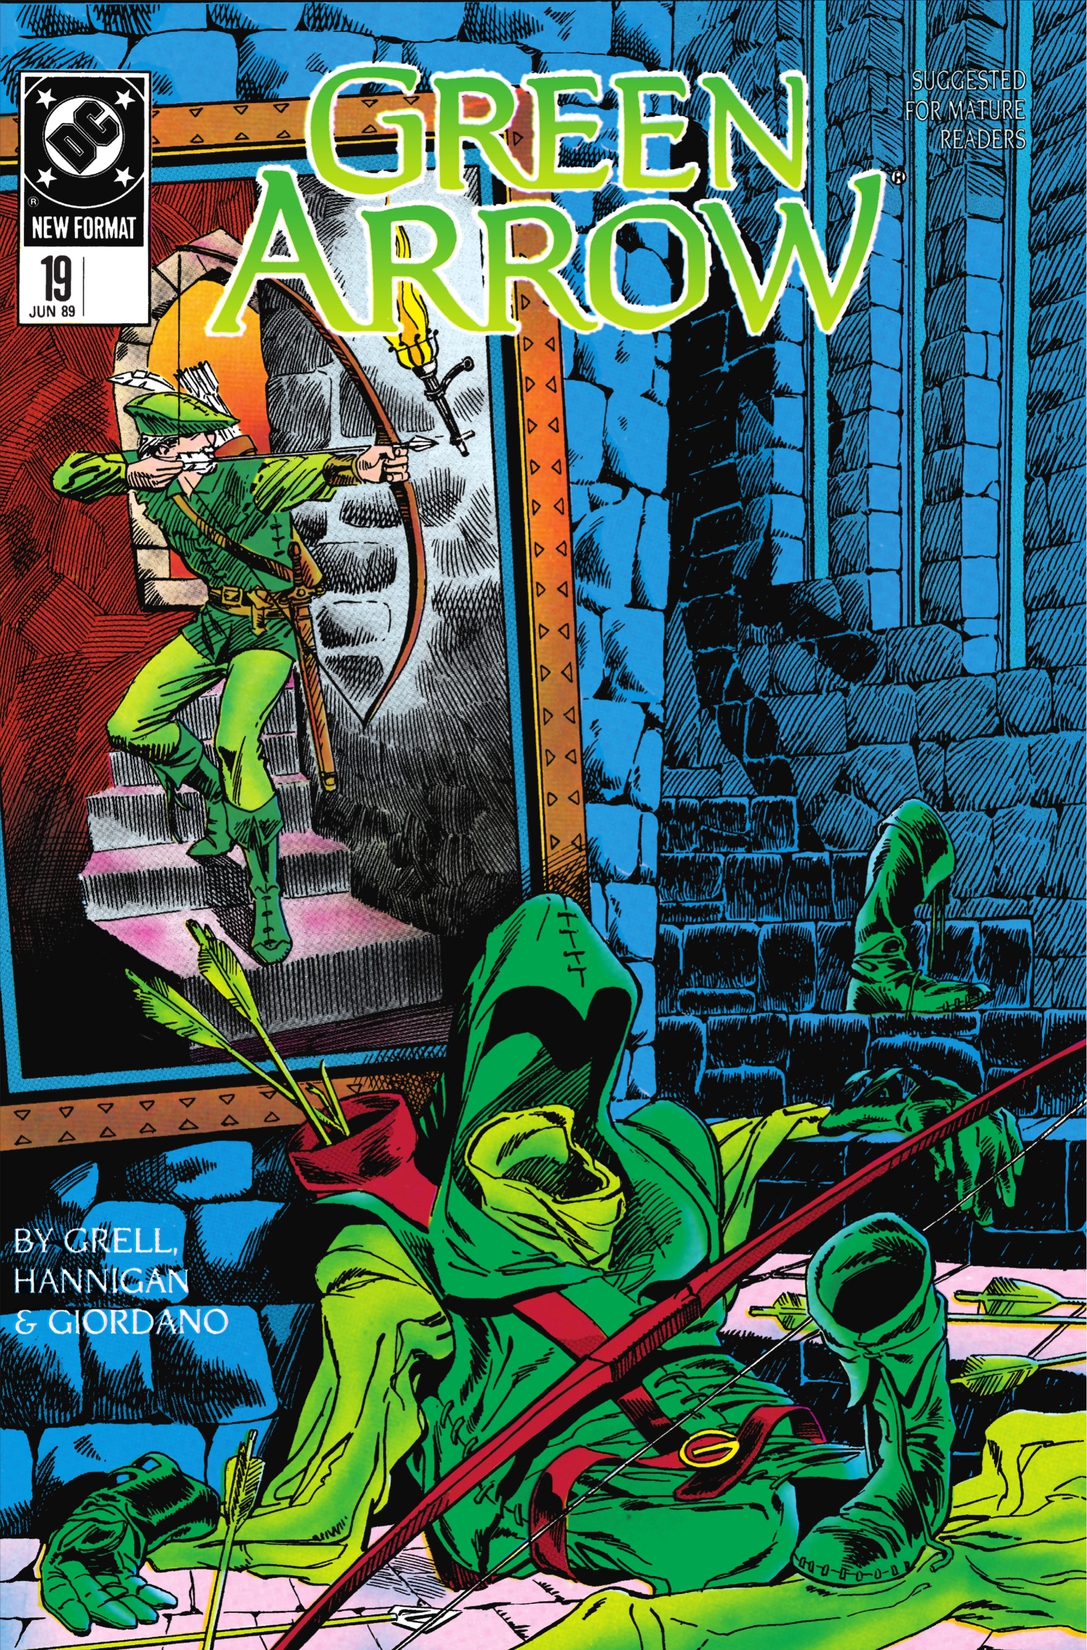 Green Arrow (1987-) #19 preview images